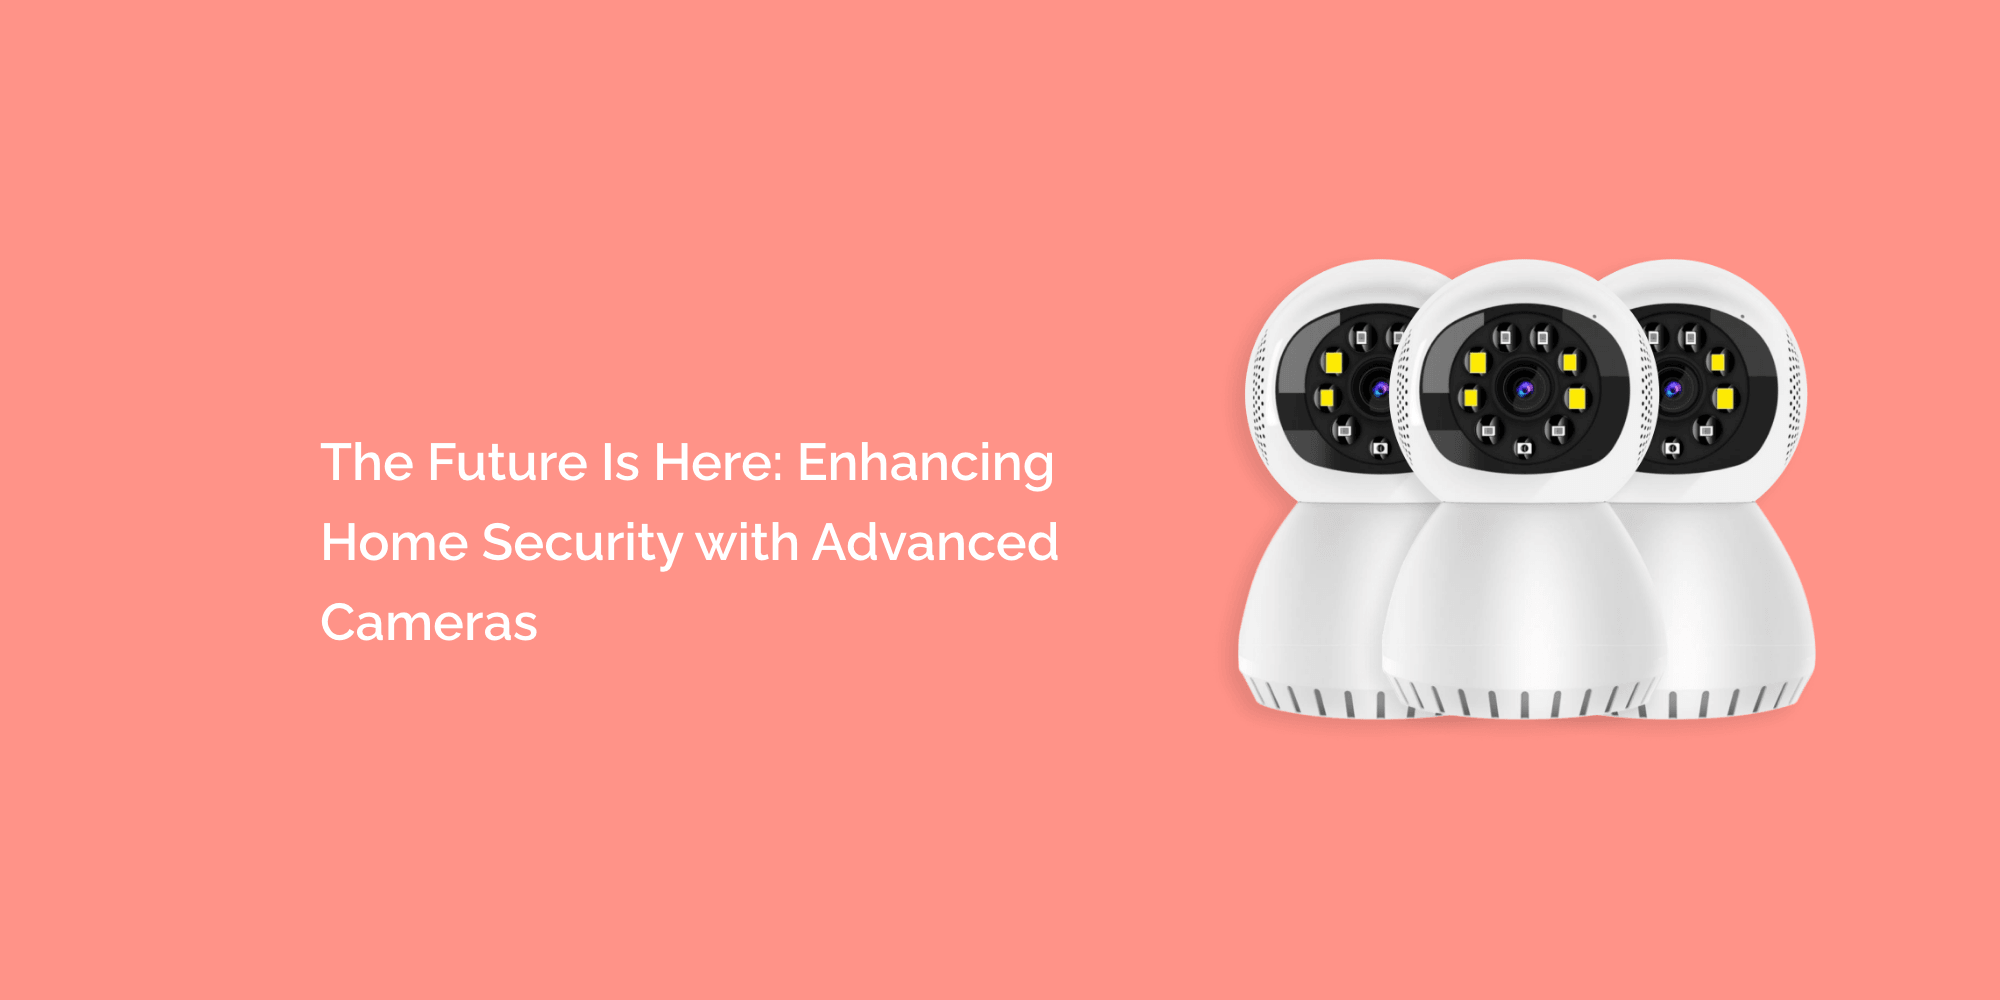 The Future Is Here: Enhancing Home Security with Advanced Cameras